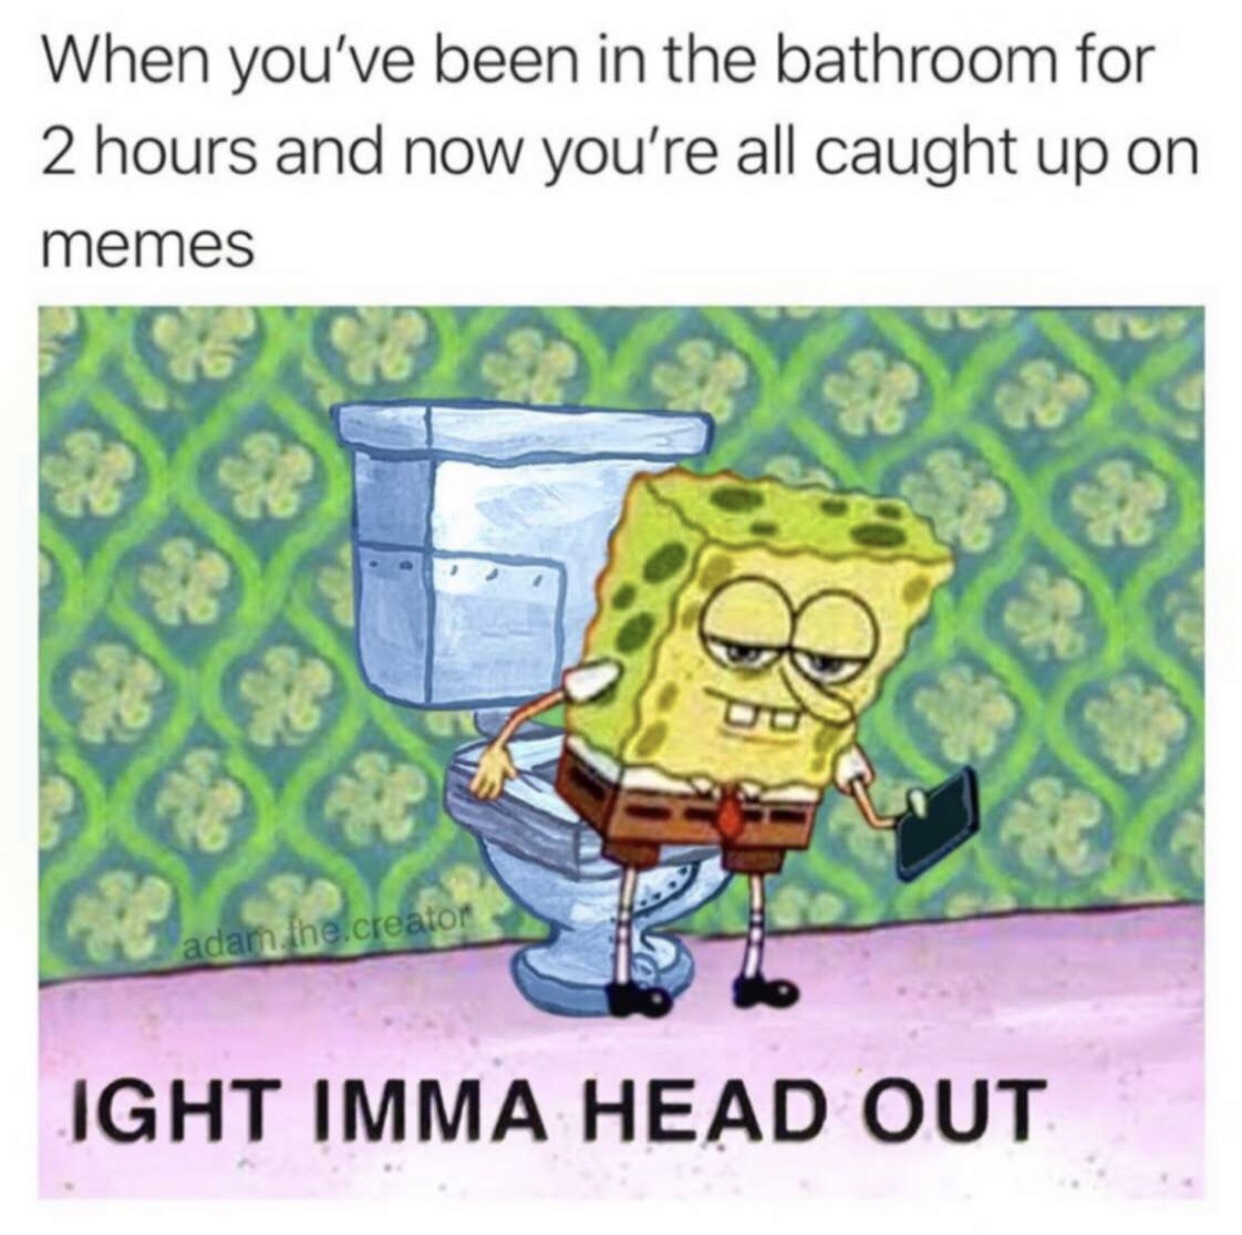 Humour - When you've been in the bathroom for 2 hours and now you're all caught up on memes Poyo adam the creator Ight Imma Head Out